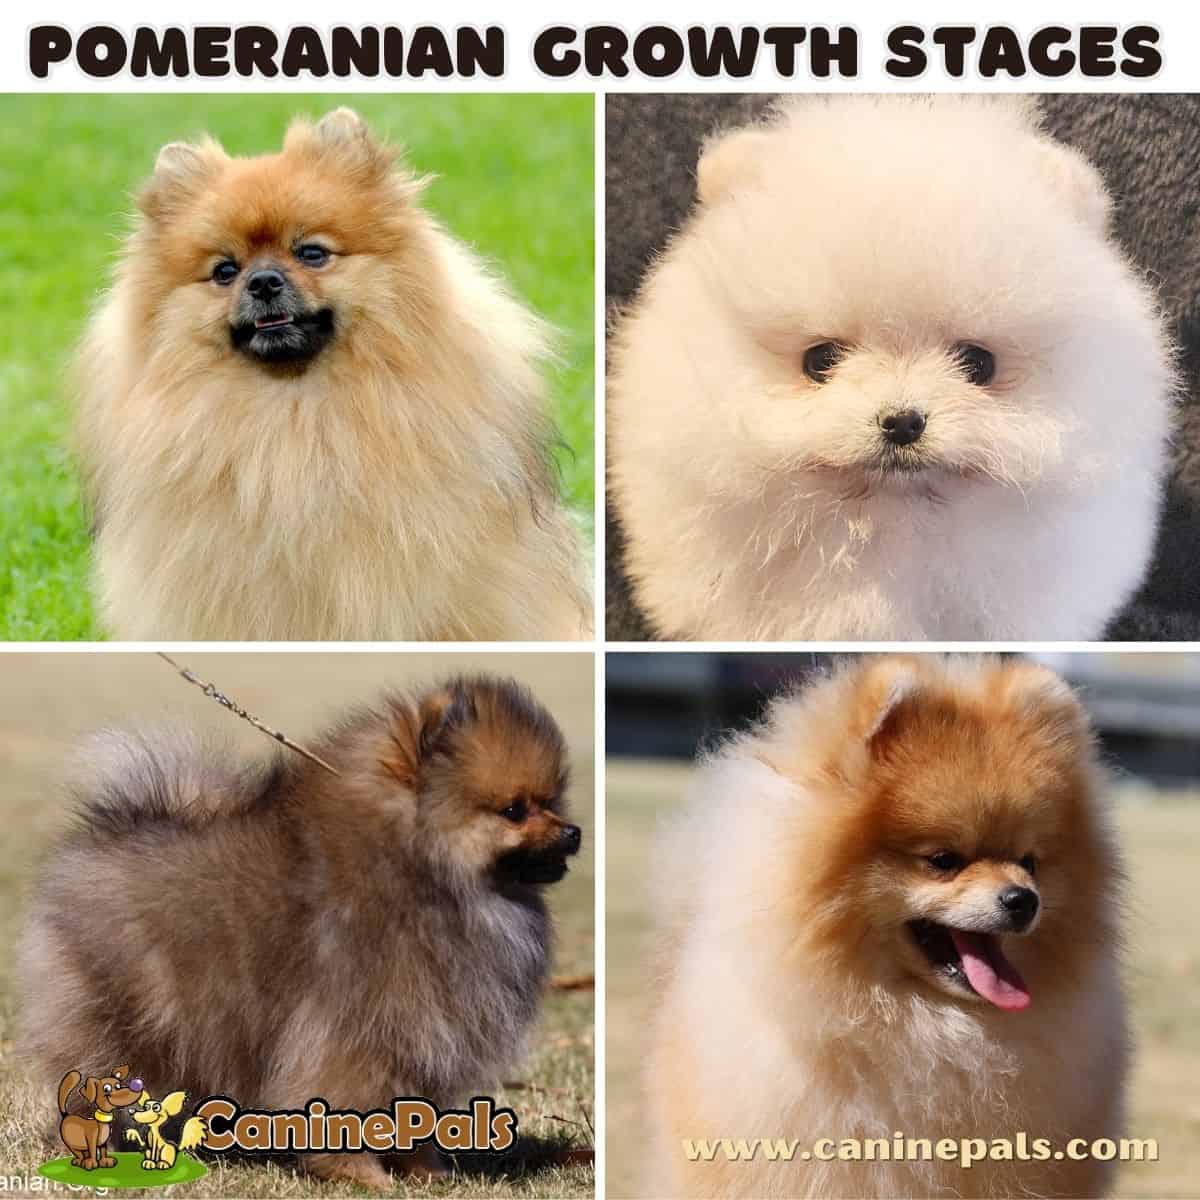 Pomeranian Growth Stages